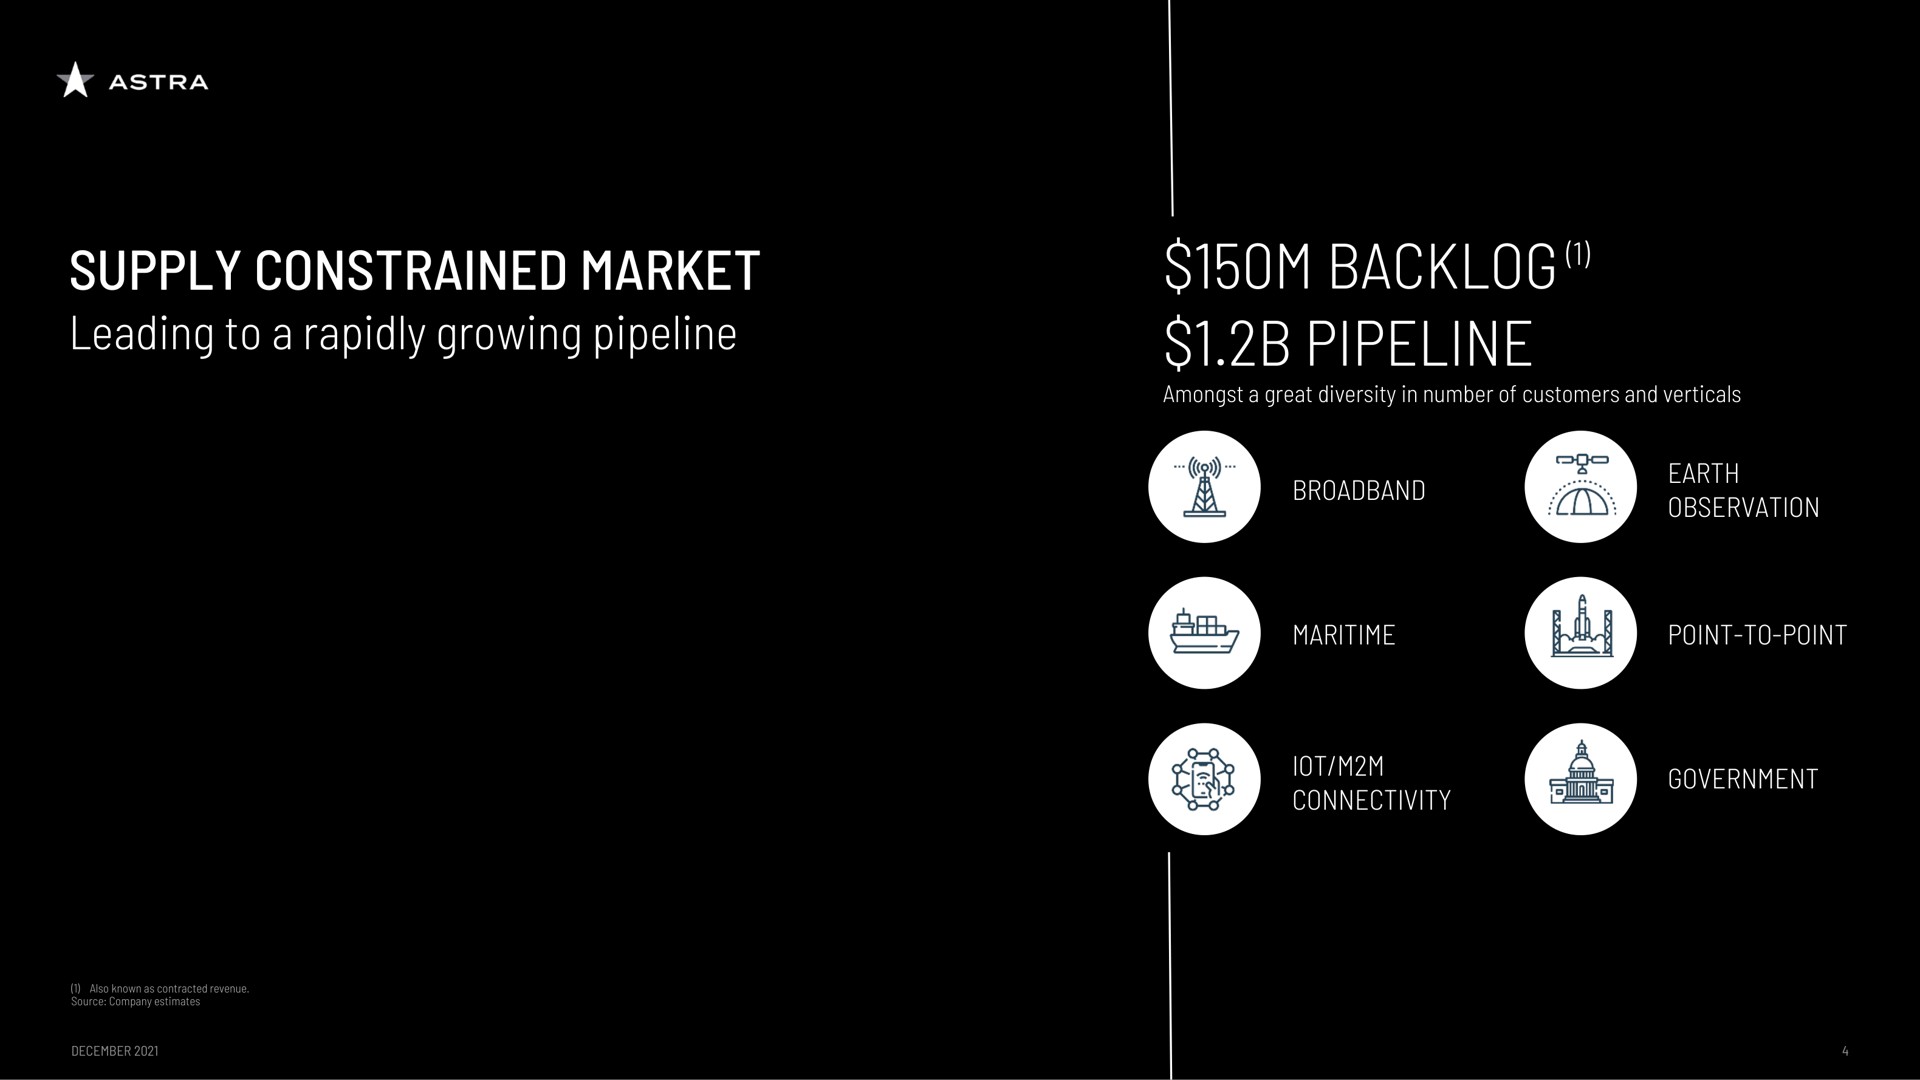 supply constrained market leading to a rapidly growing pipeline backlog pipeline me point to point | Astra